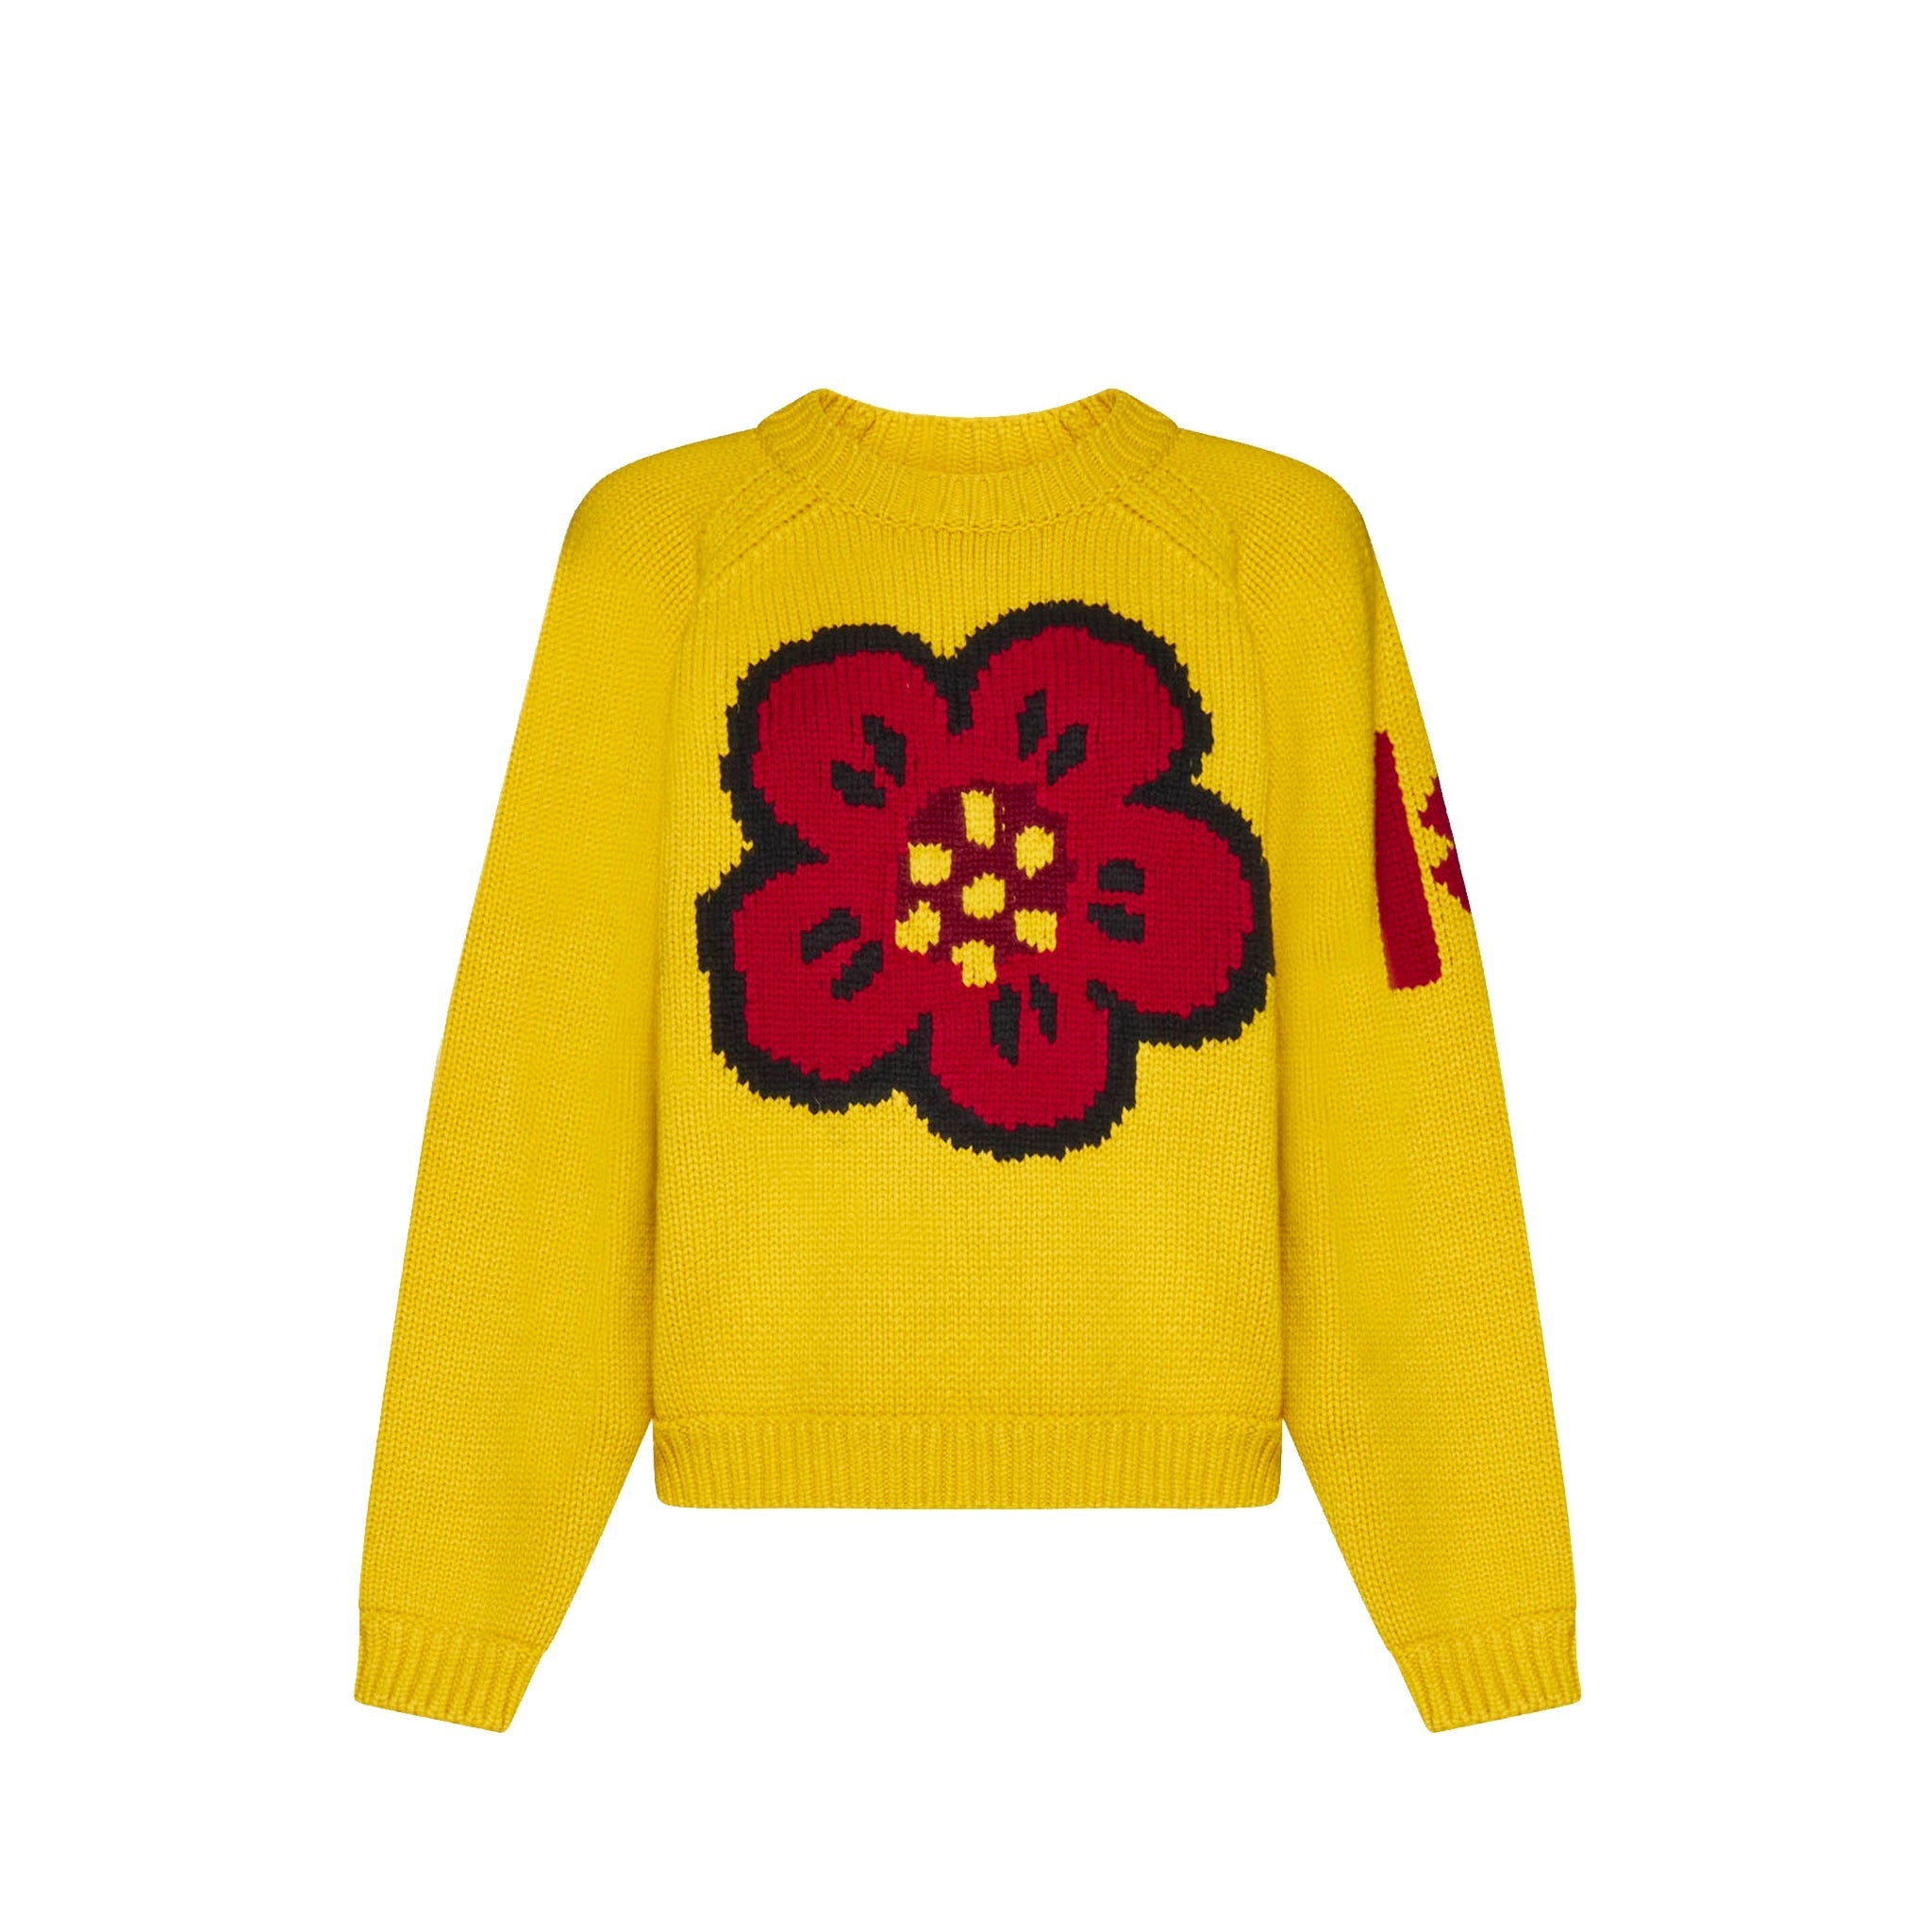 KENZO-OUTLET-SALE-Kenzo-Cotton-Pullover-Strick-YELLOW-M-ARCHIVE-COLLECTION.jpg